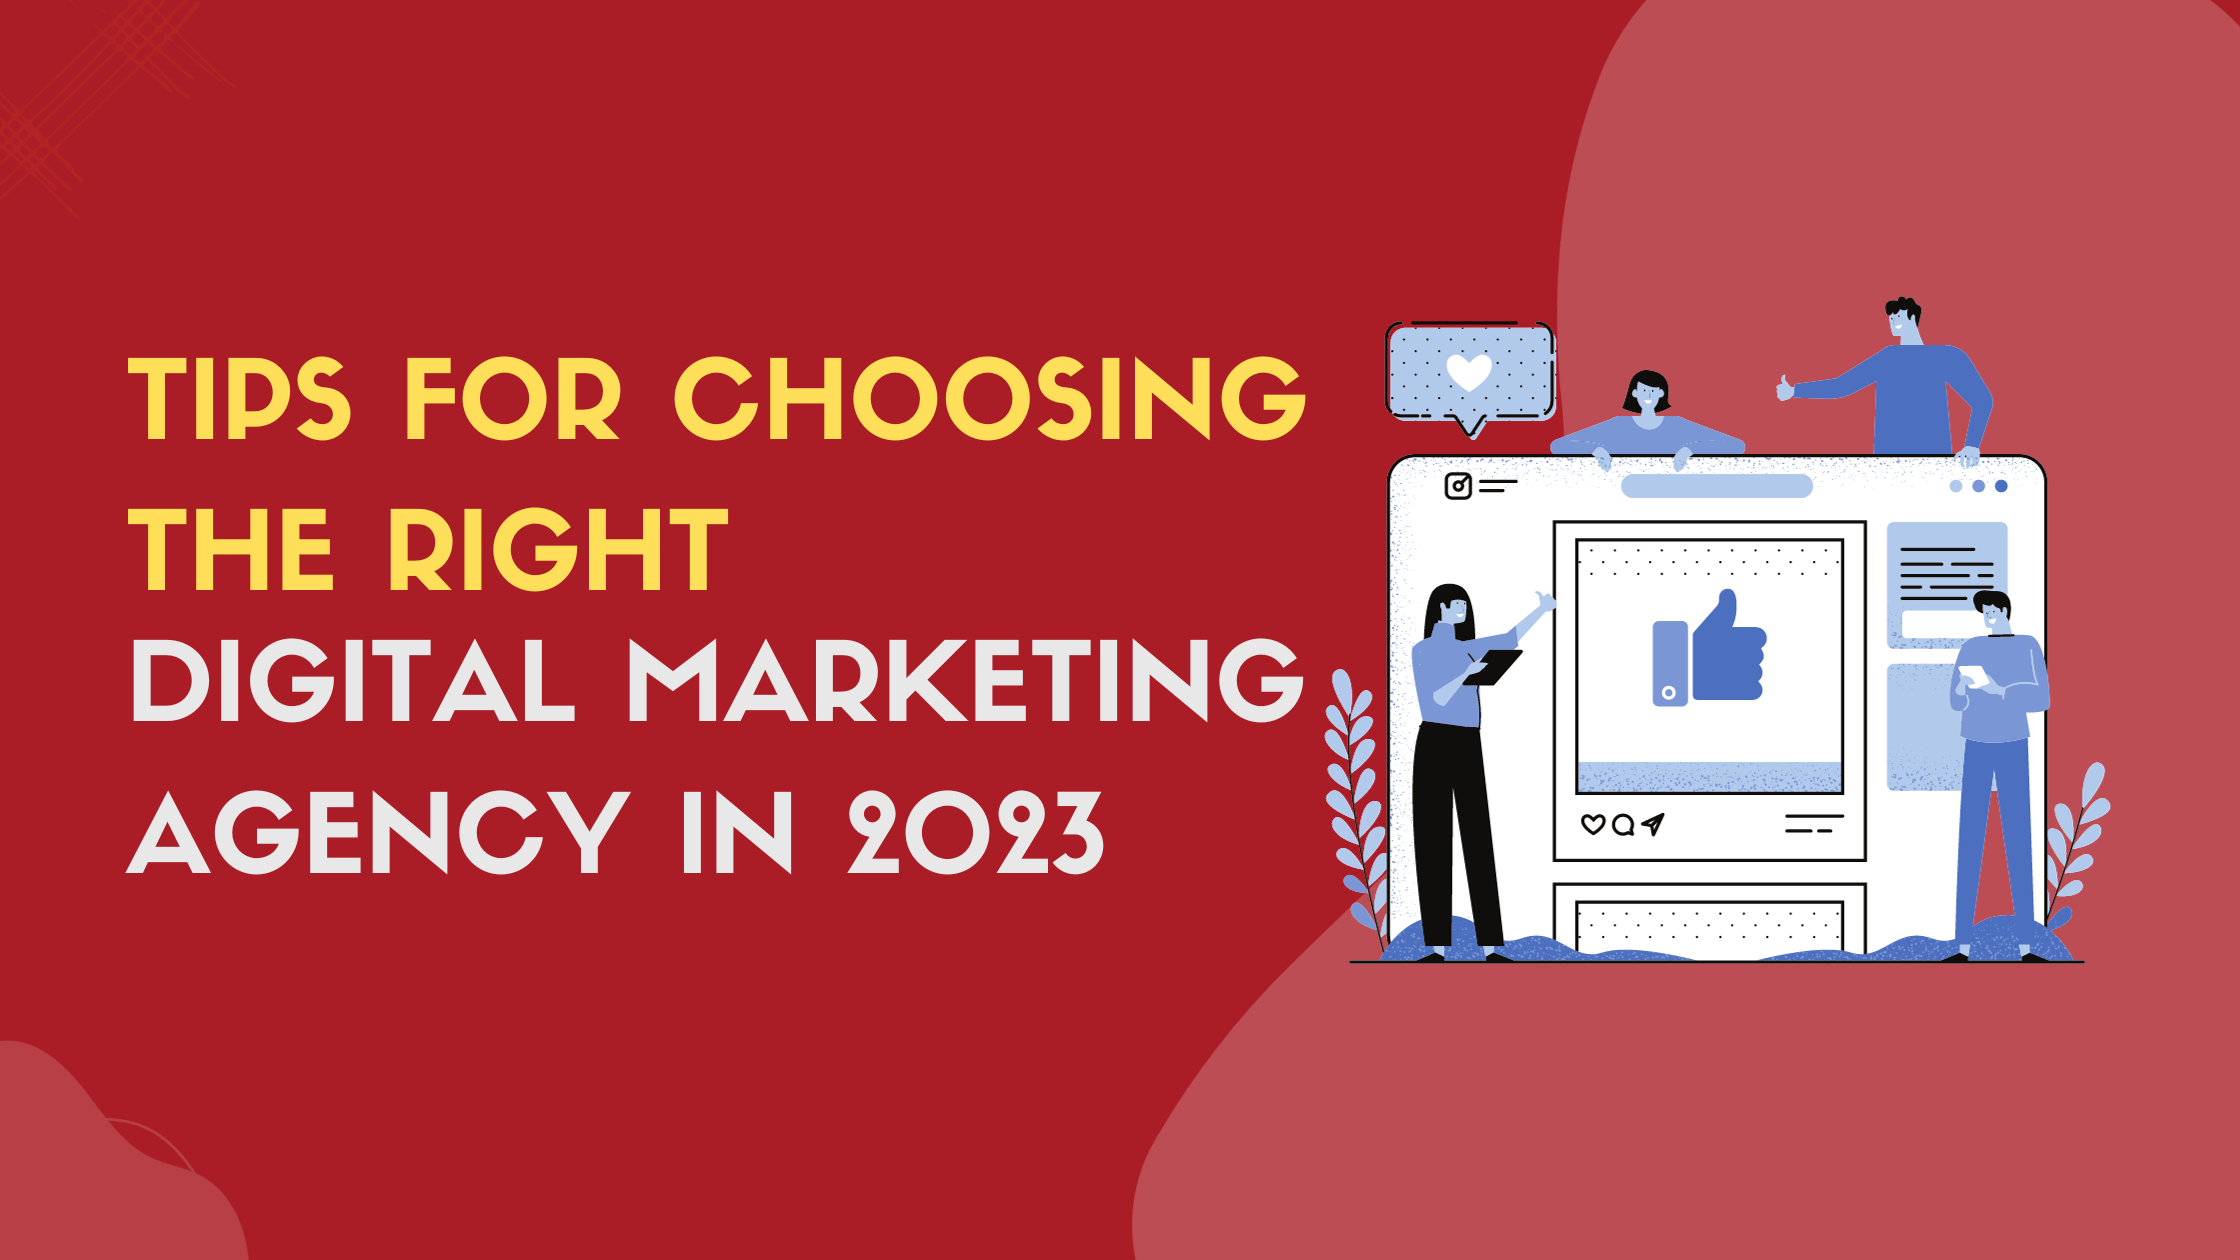 Tips for Choosing the Right Digital Marketing Agency in 2023